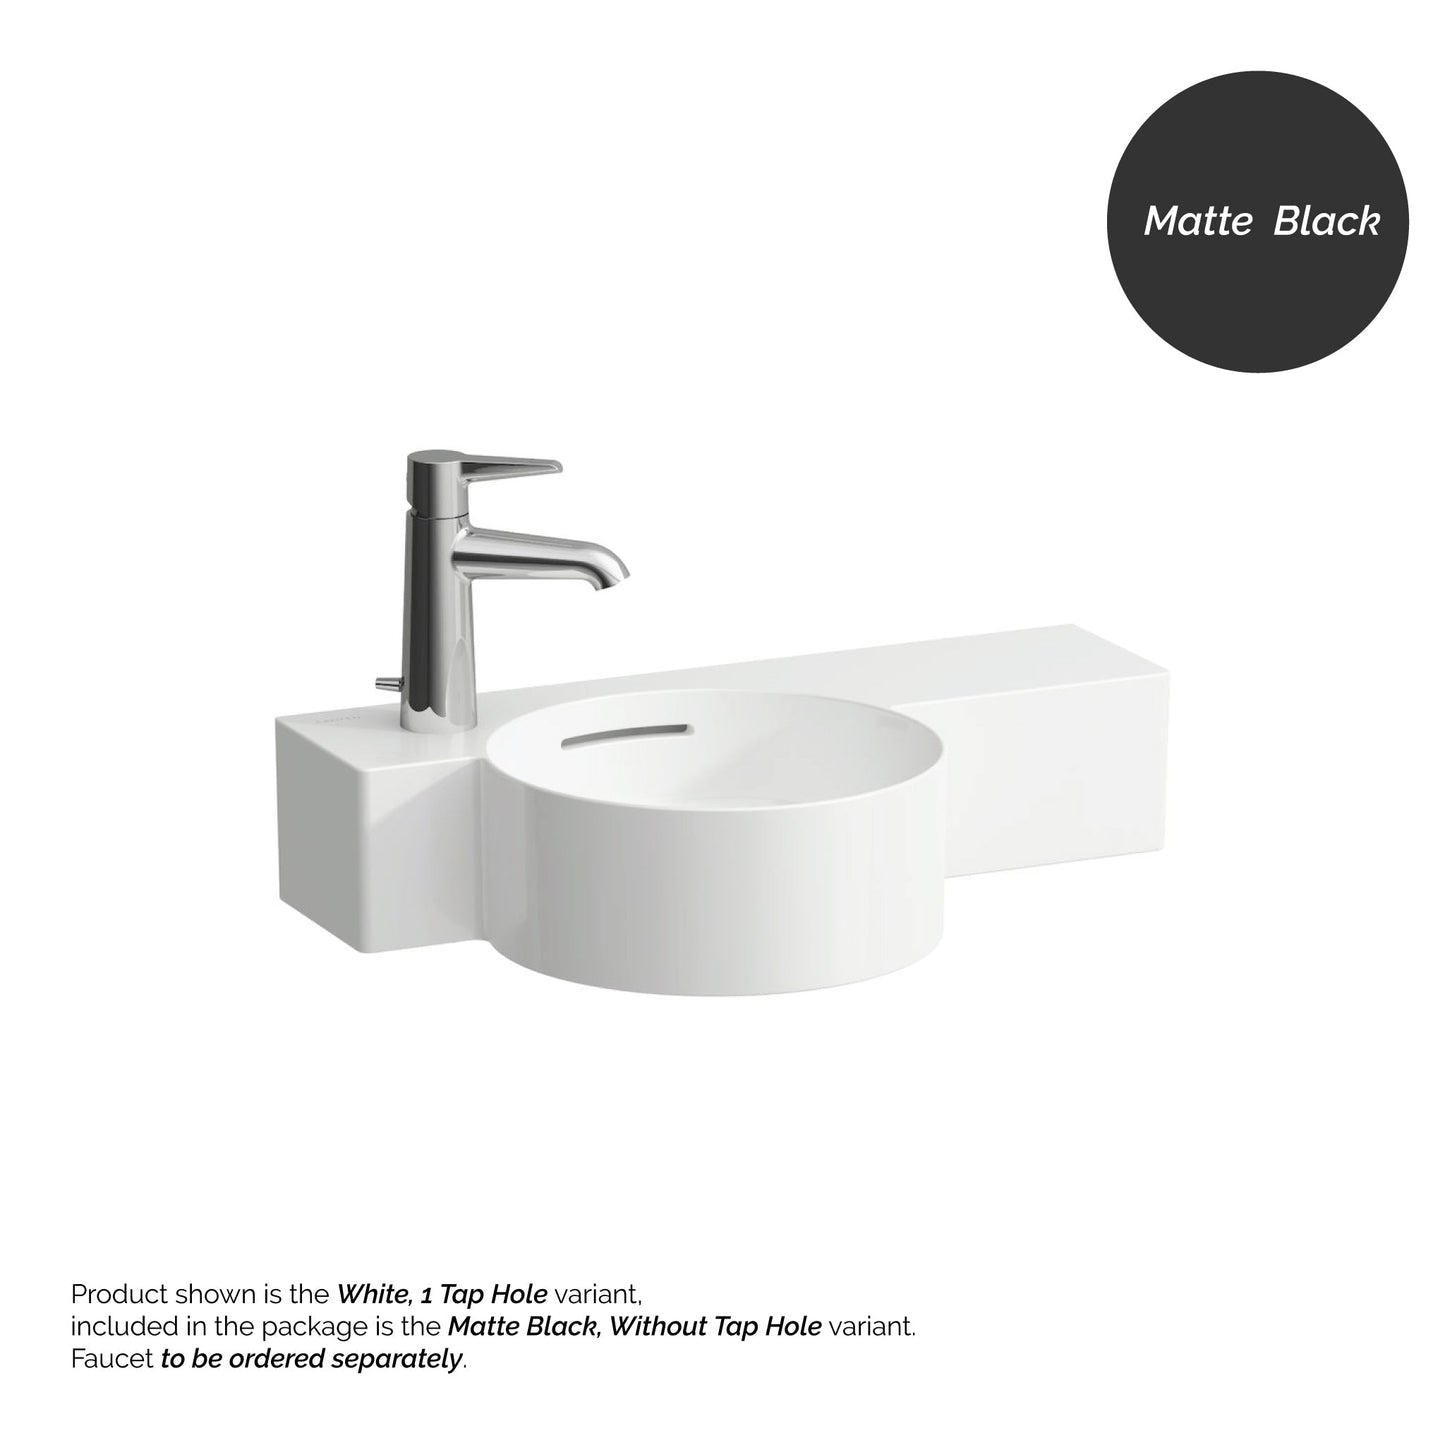 Laufen Val 22" x 12" Matte Black Wall-Mounted Shelf-Right Bathroom Sink Without Faucet Hole